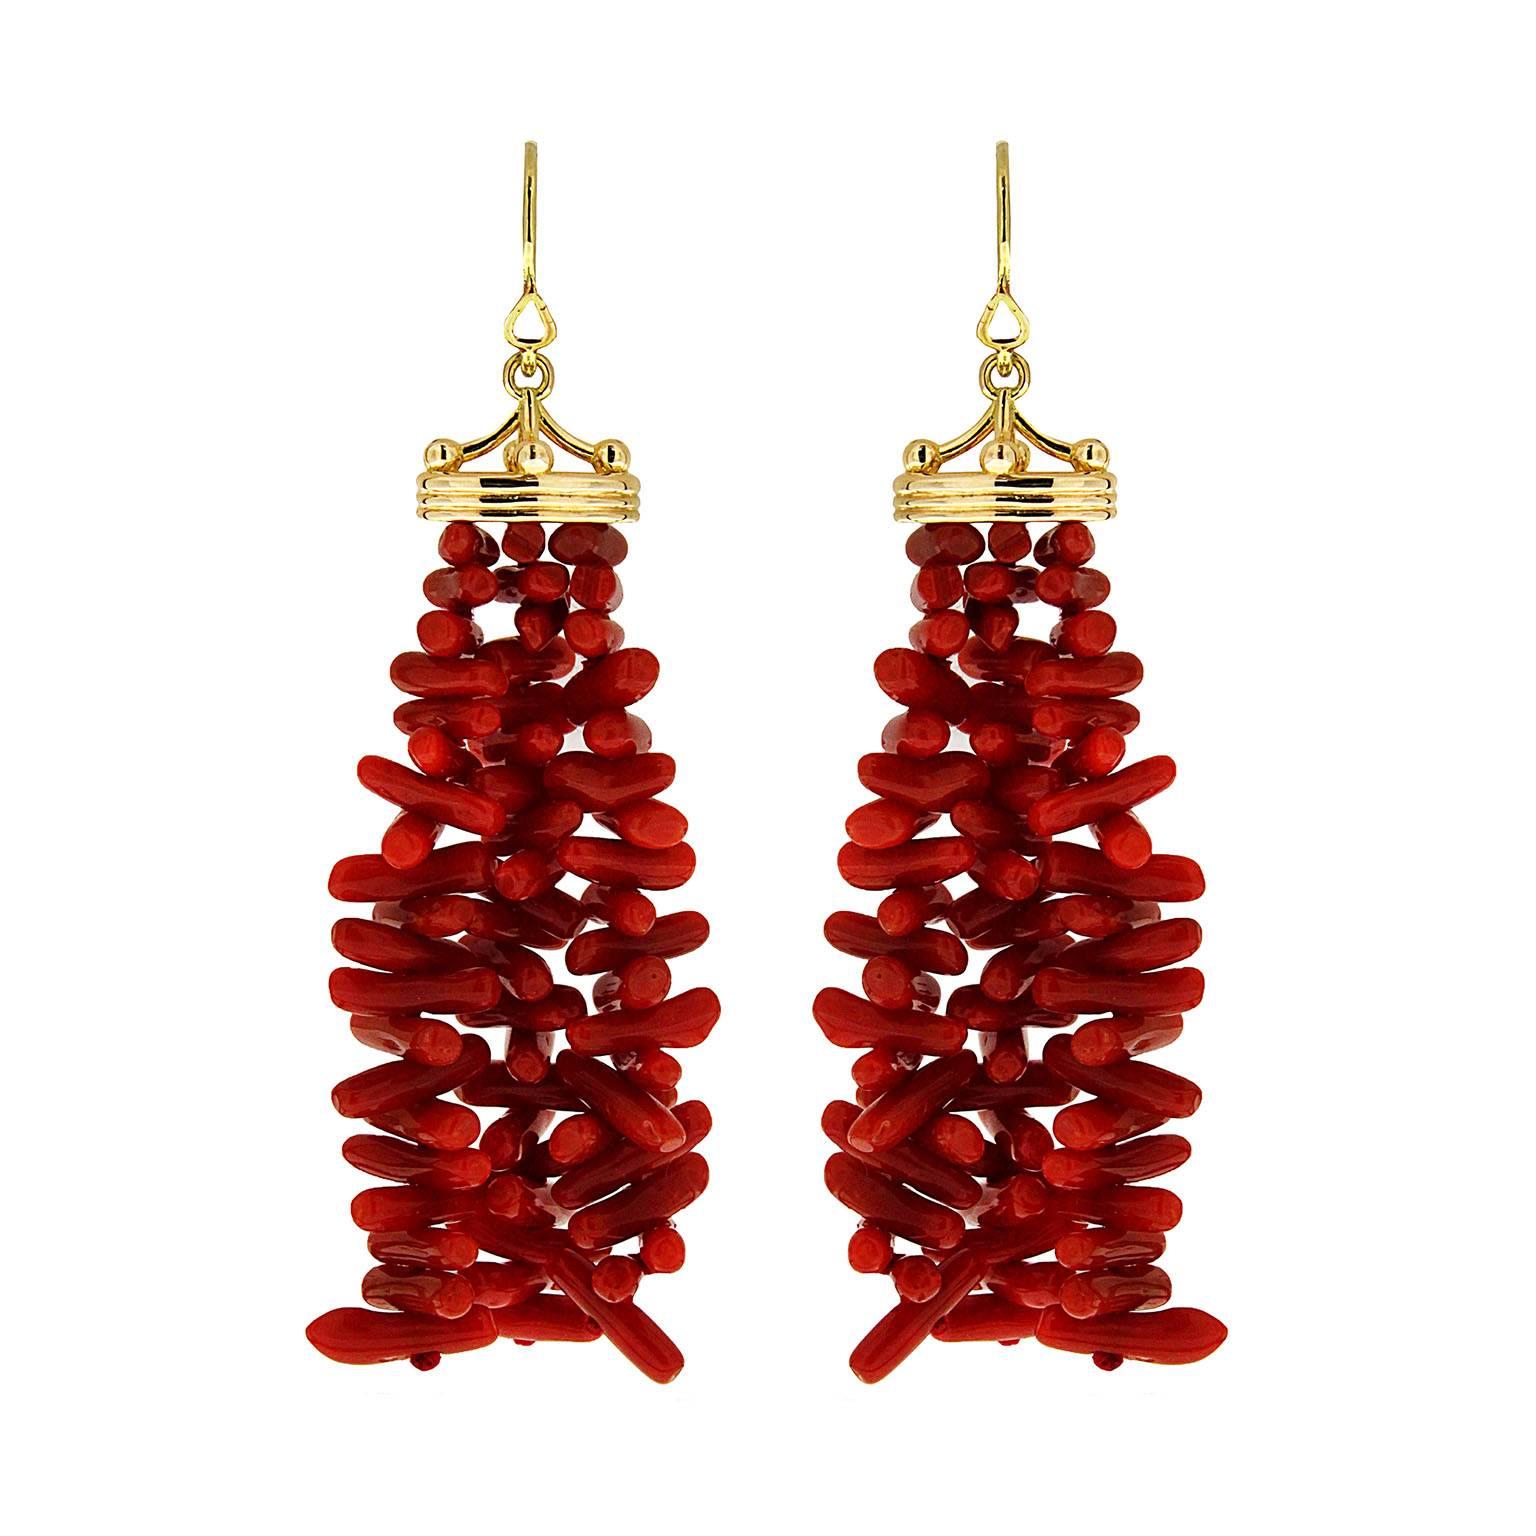 Valentin Magro Gold Crown Cap Coral Tassels French Wire Earrings